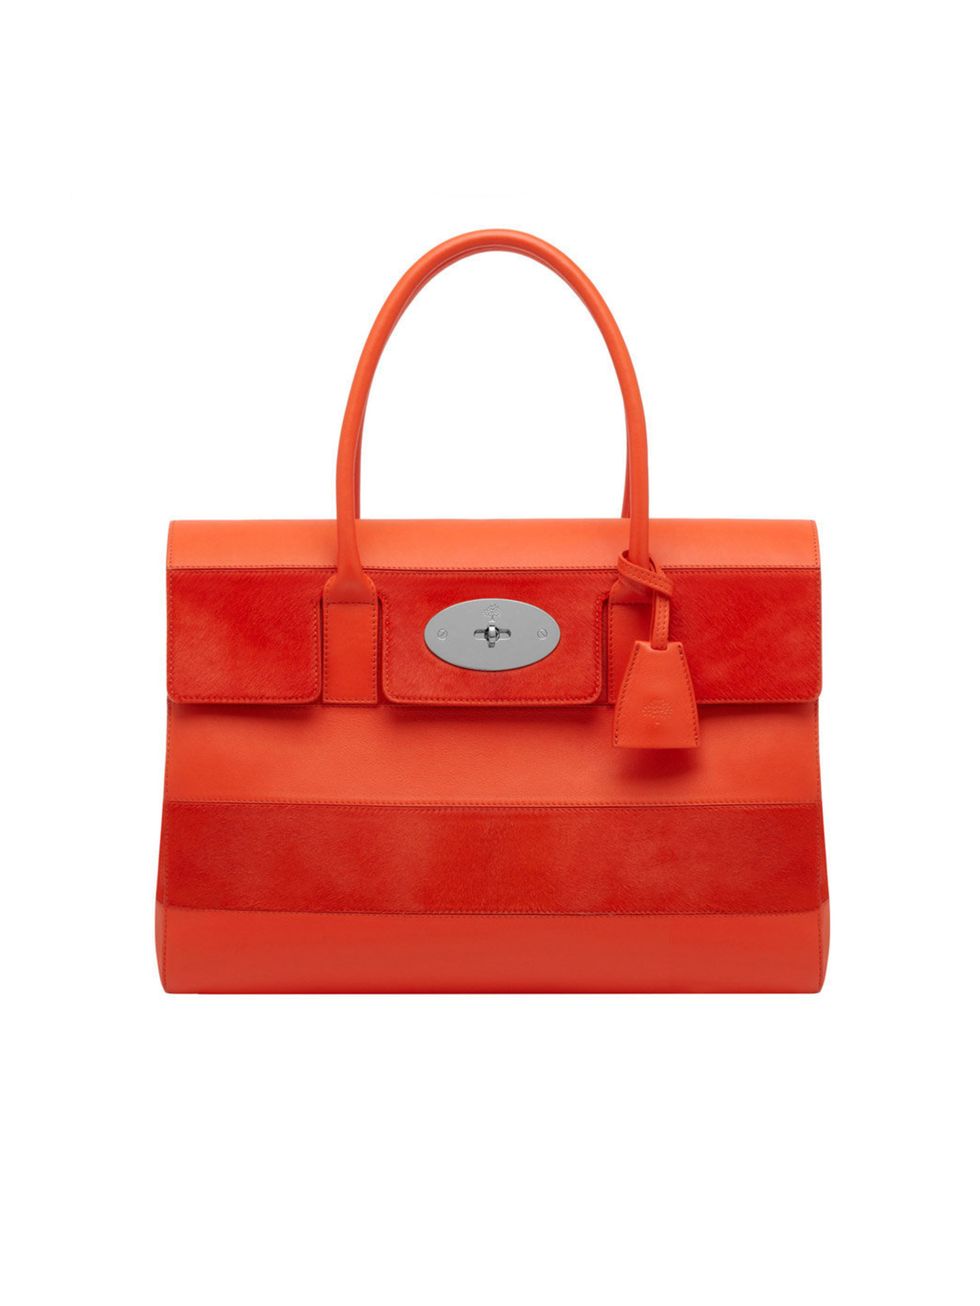 <p>Mulberry Bayswater with stripes in fiery red, spring/summer 2014</p>